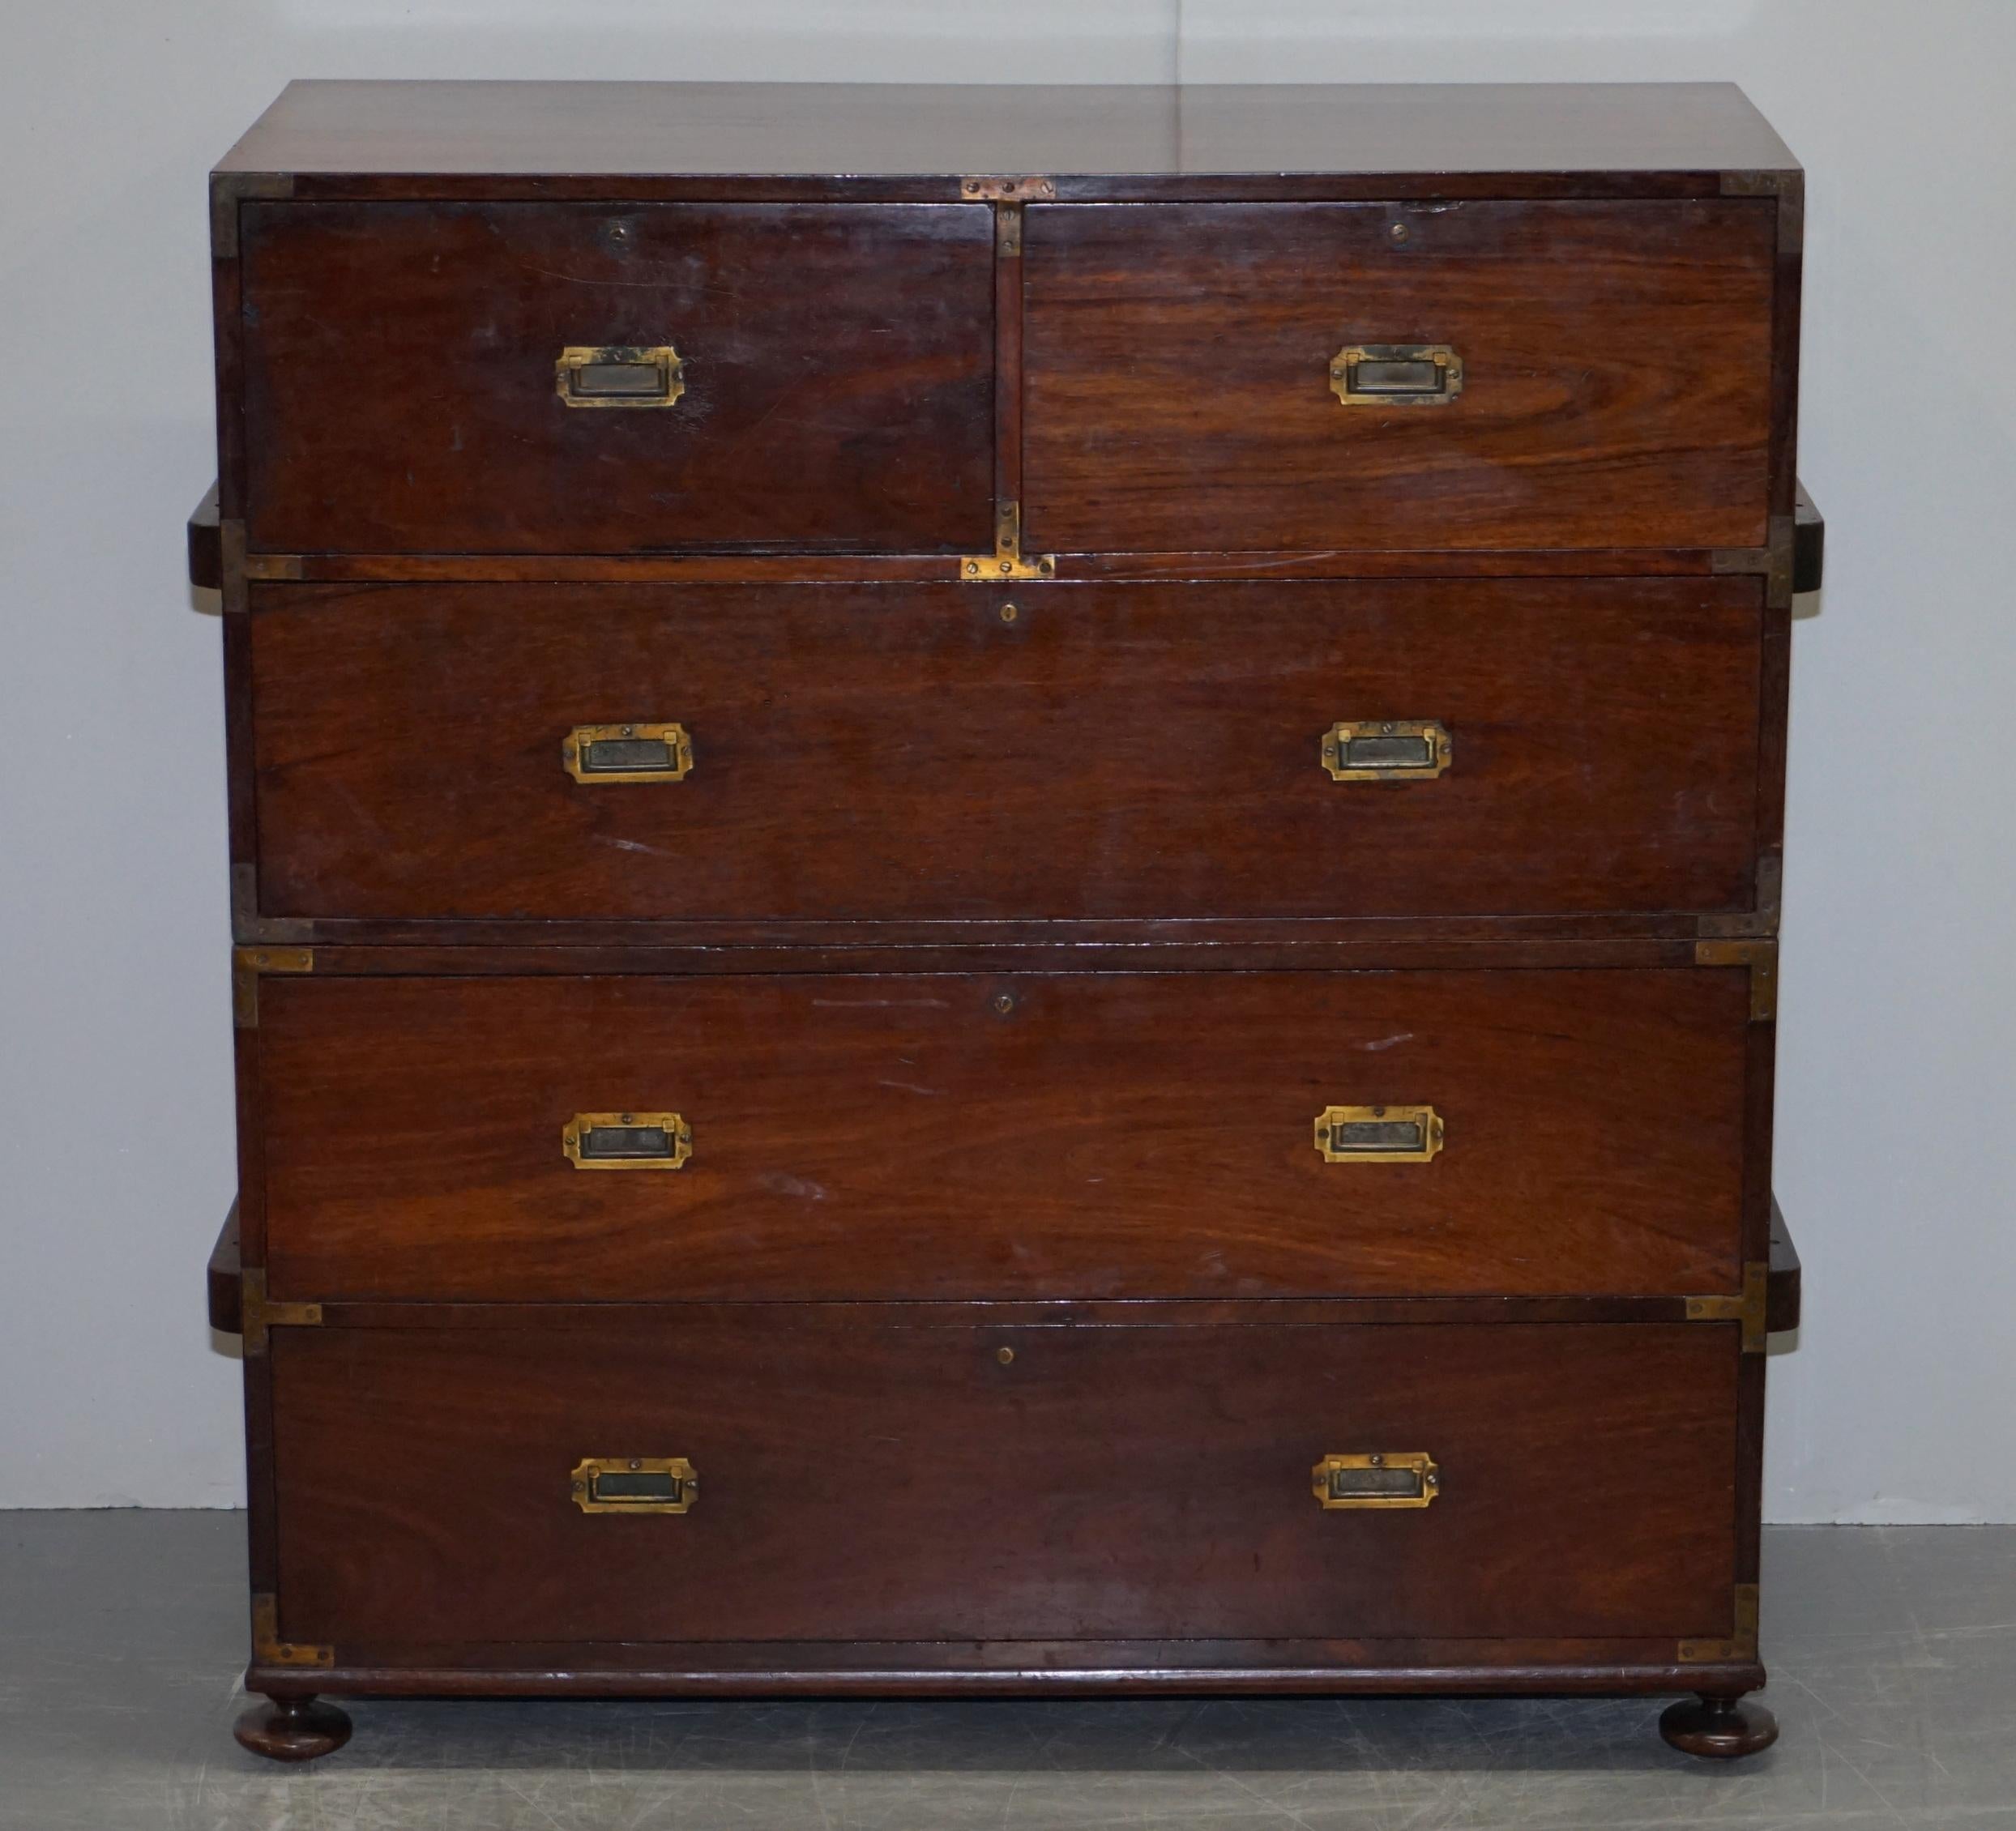 We are delighted to offer for salethis very rare original Camphor wood military campaign chest with sliding Secrataire desk and writing slope each lock numbered and stamped Stamford Co Feb 1 76 that has been lightly restored 

A very rare and